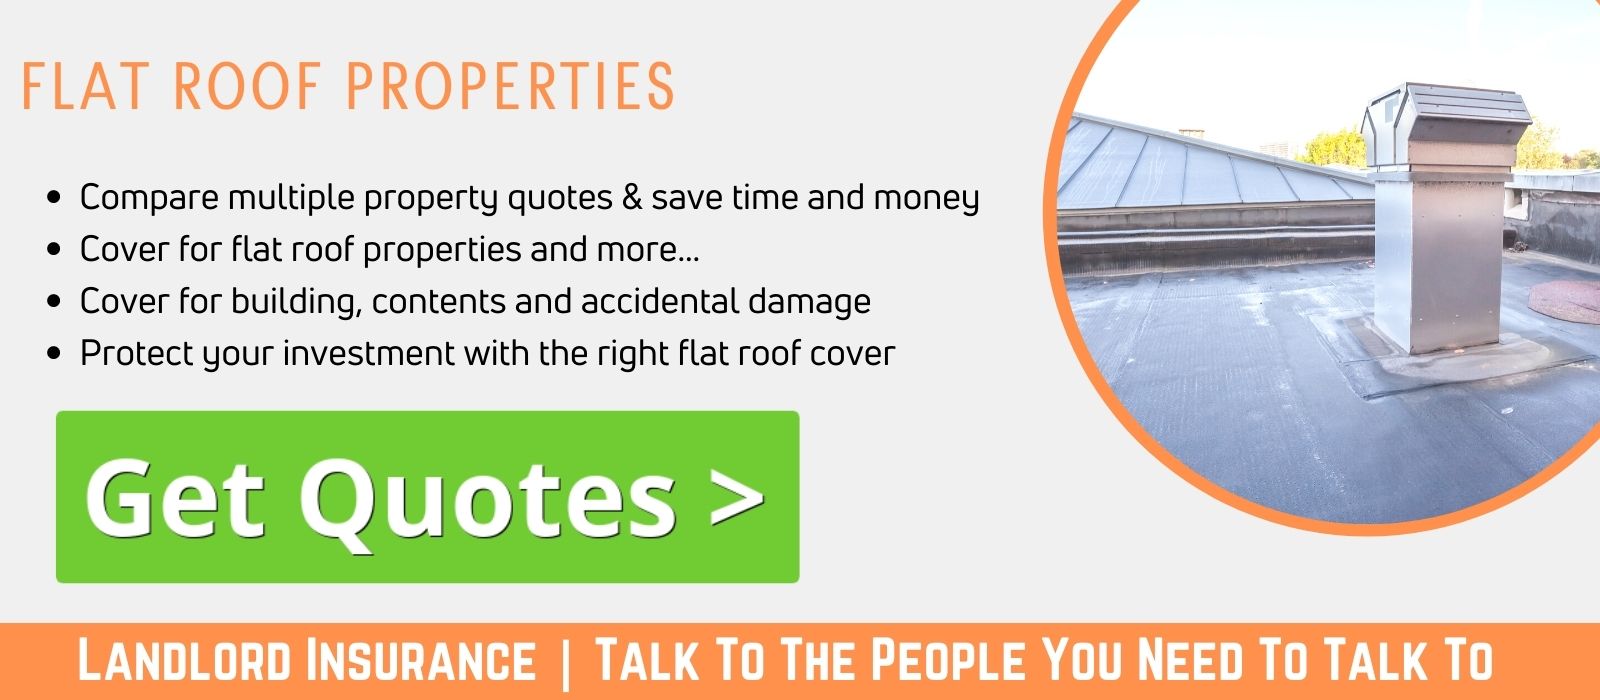 Landlord insurance for flat roof properties